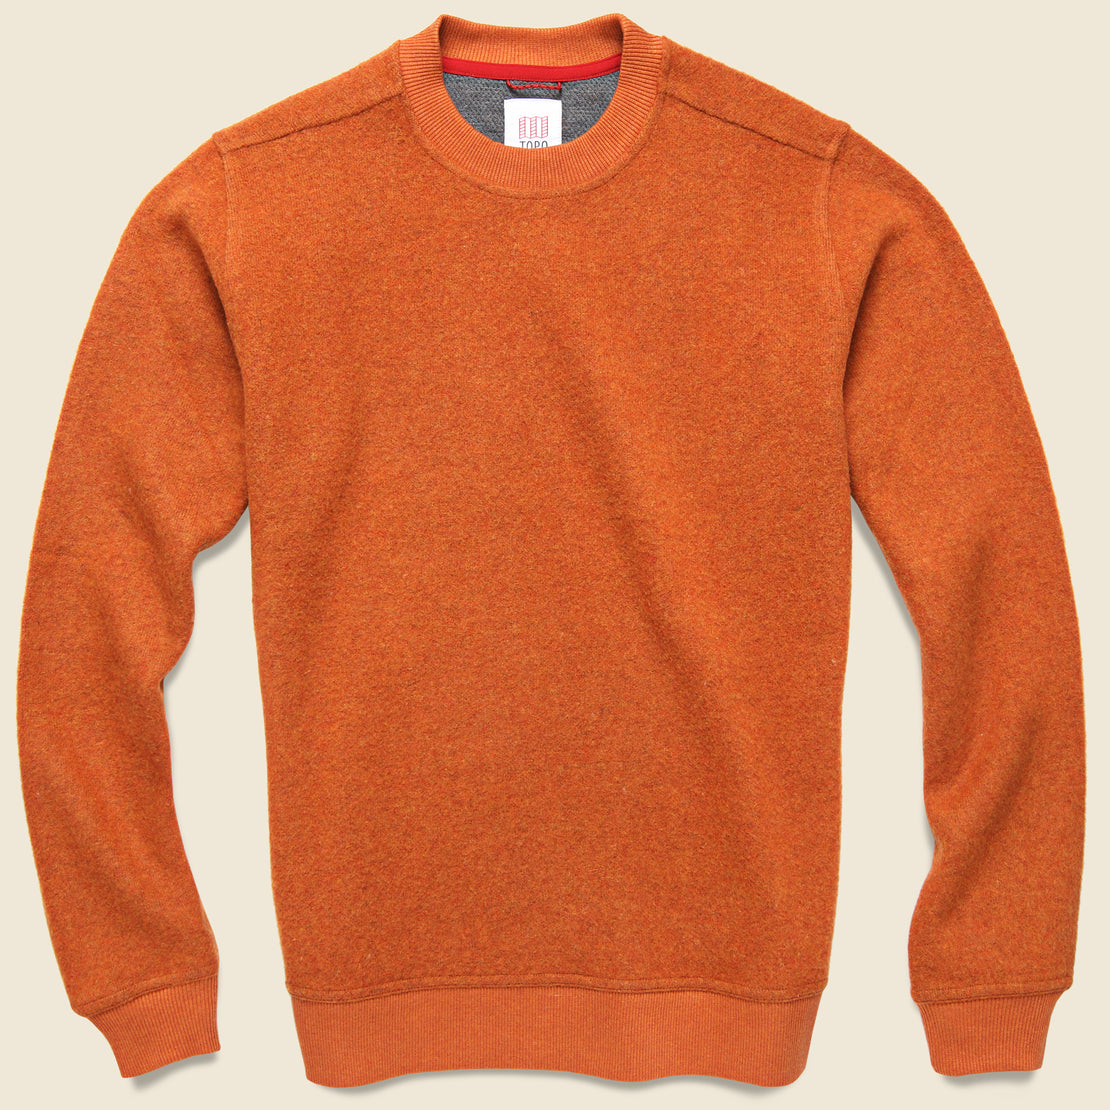 Topo Designs Global Sweater - Clay